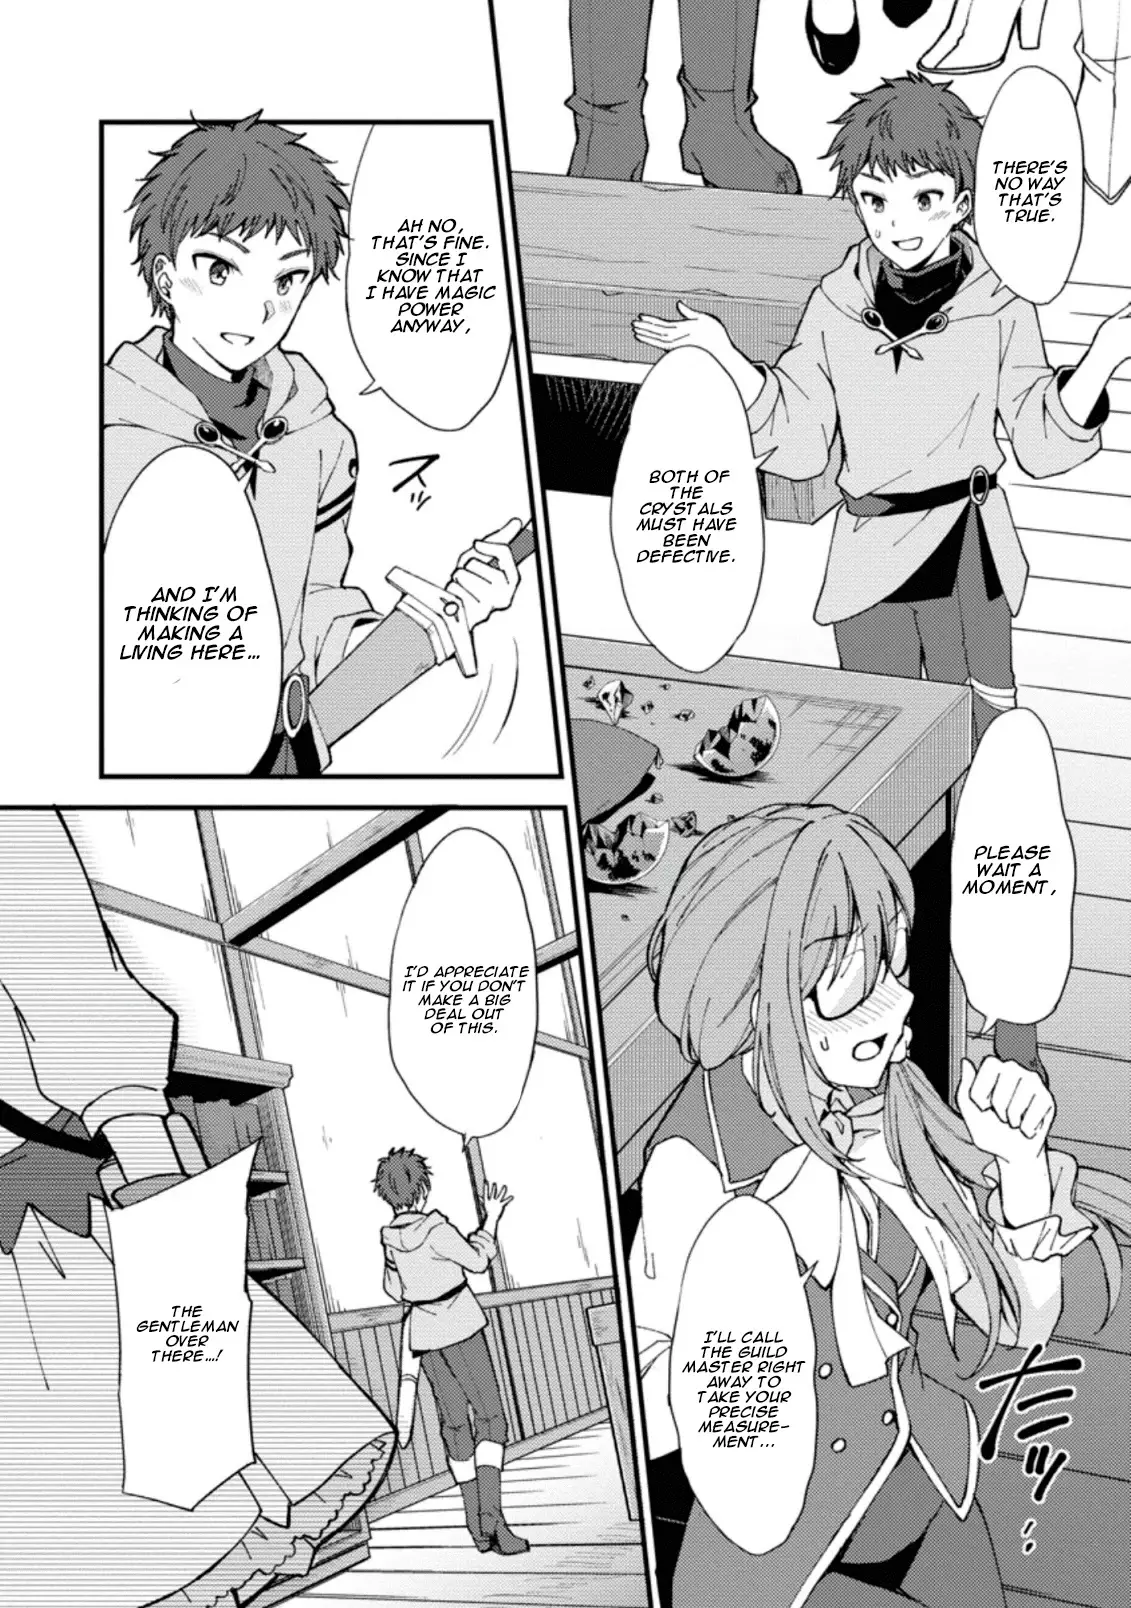 A Sword Master Childhood Friend Power Harassed Me Harshly, So I Broke Off Our Relationship And Make A Fresh Start At The Frontier As A Magic Swordsman. - 1 page 23